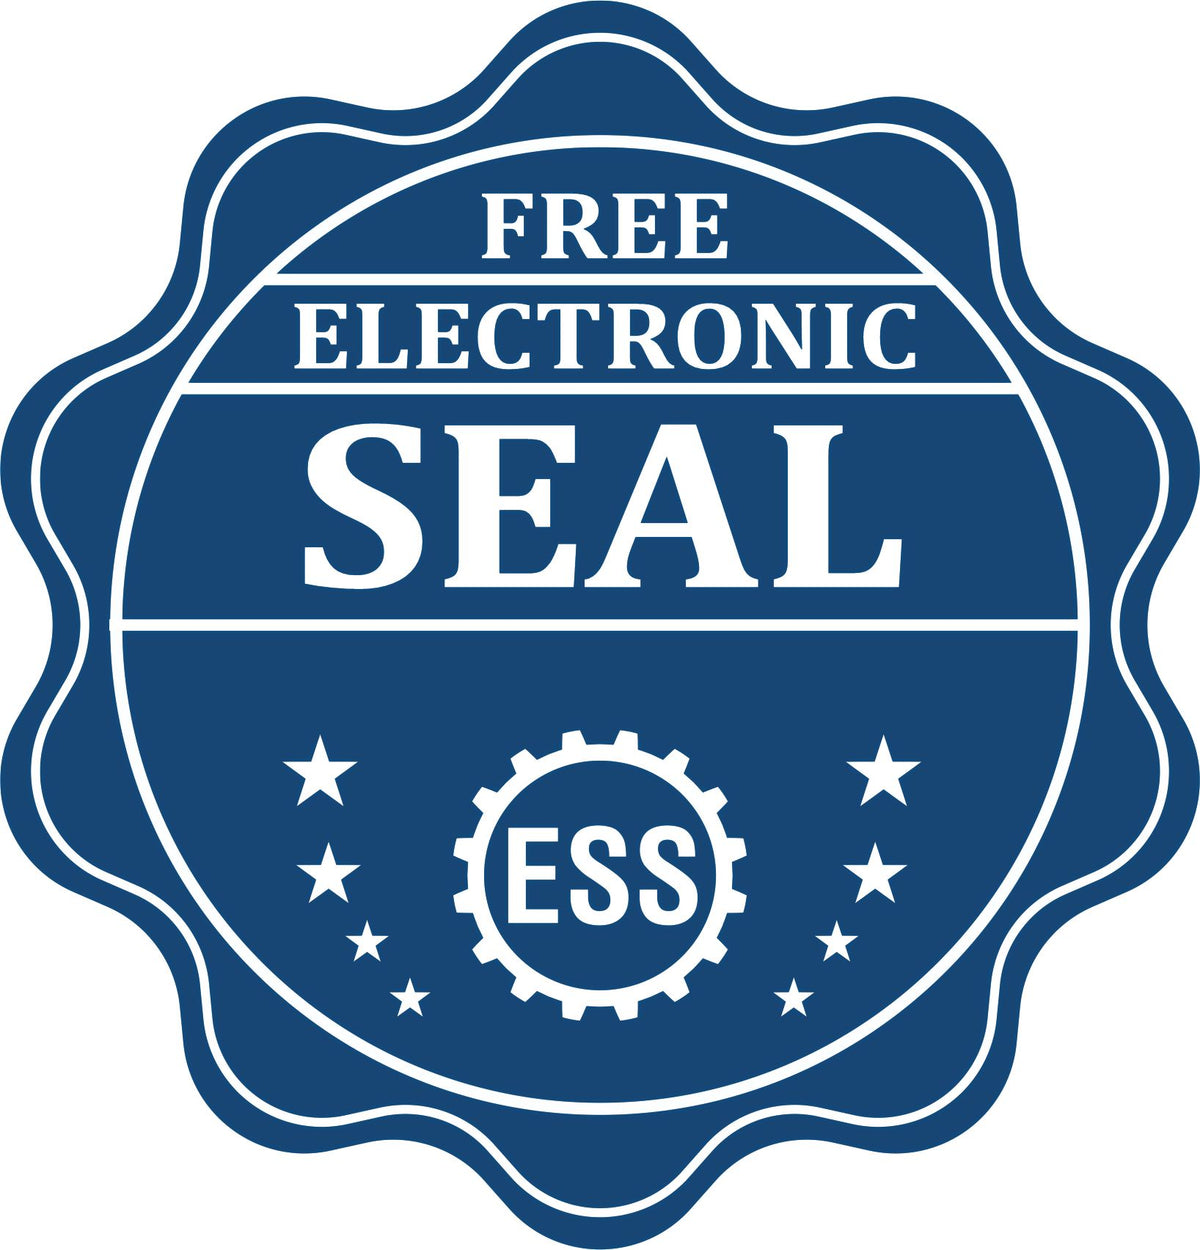 A badge showing a free electronic seal for the State of Alaska Long Reach Architectural Embossing Seal with stars and the ESS gear on the emblem.